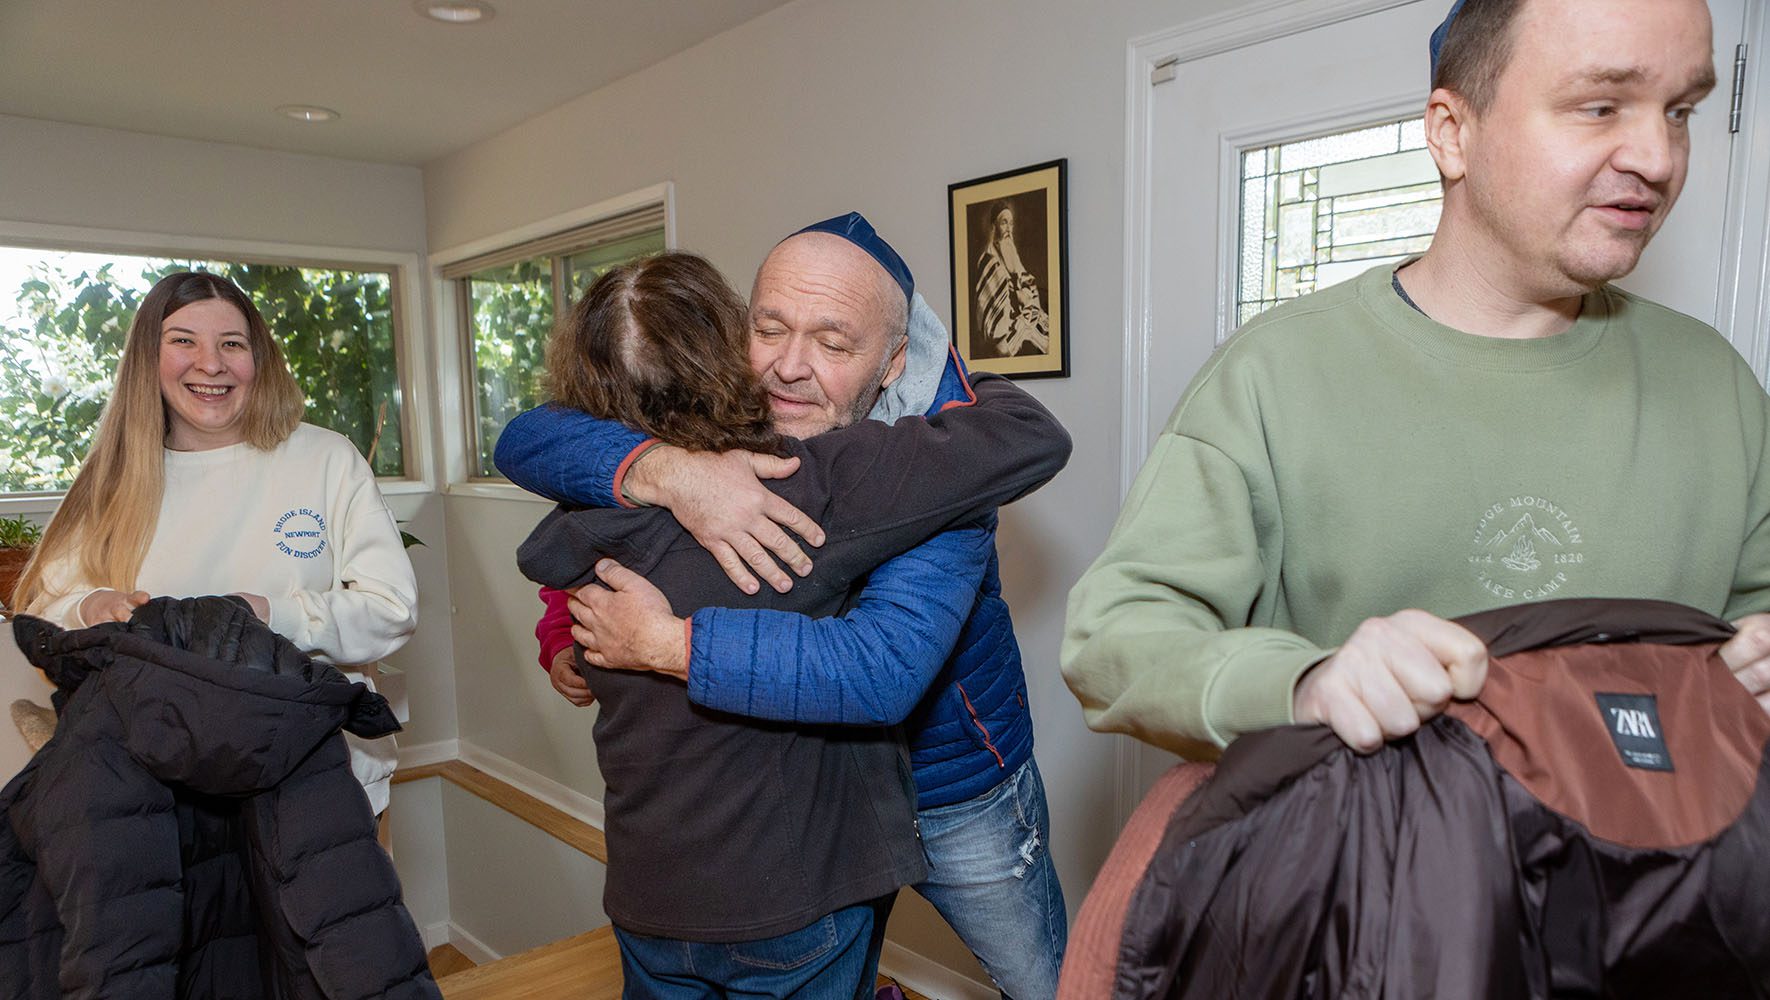 Oleksandr Kushnarov, center, embraces Sara Safdie, as the family arrives at Safdie's home for the Passover Seder. At left is Kushnarov's daughter-in-law, Daria Levit, and at right, his son Eduard Levit. | In Time for Passover, Ukrainians Find Jewish Community in U.S. | HIAS